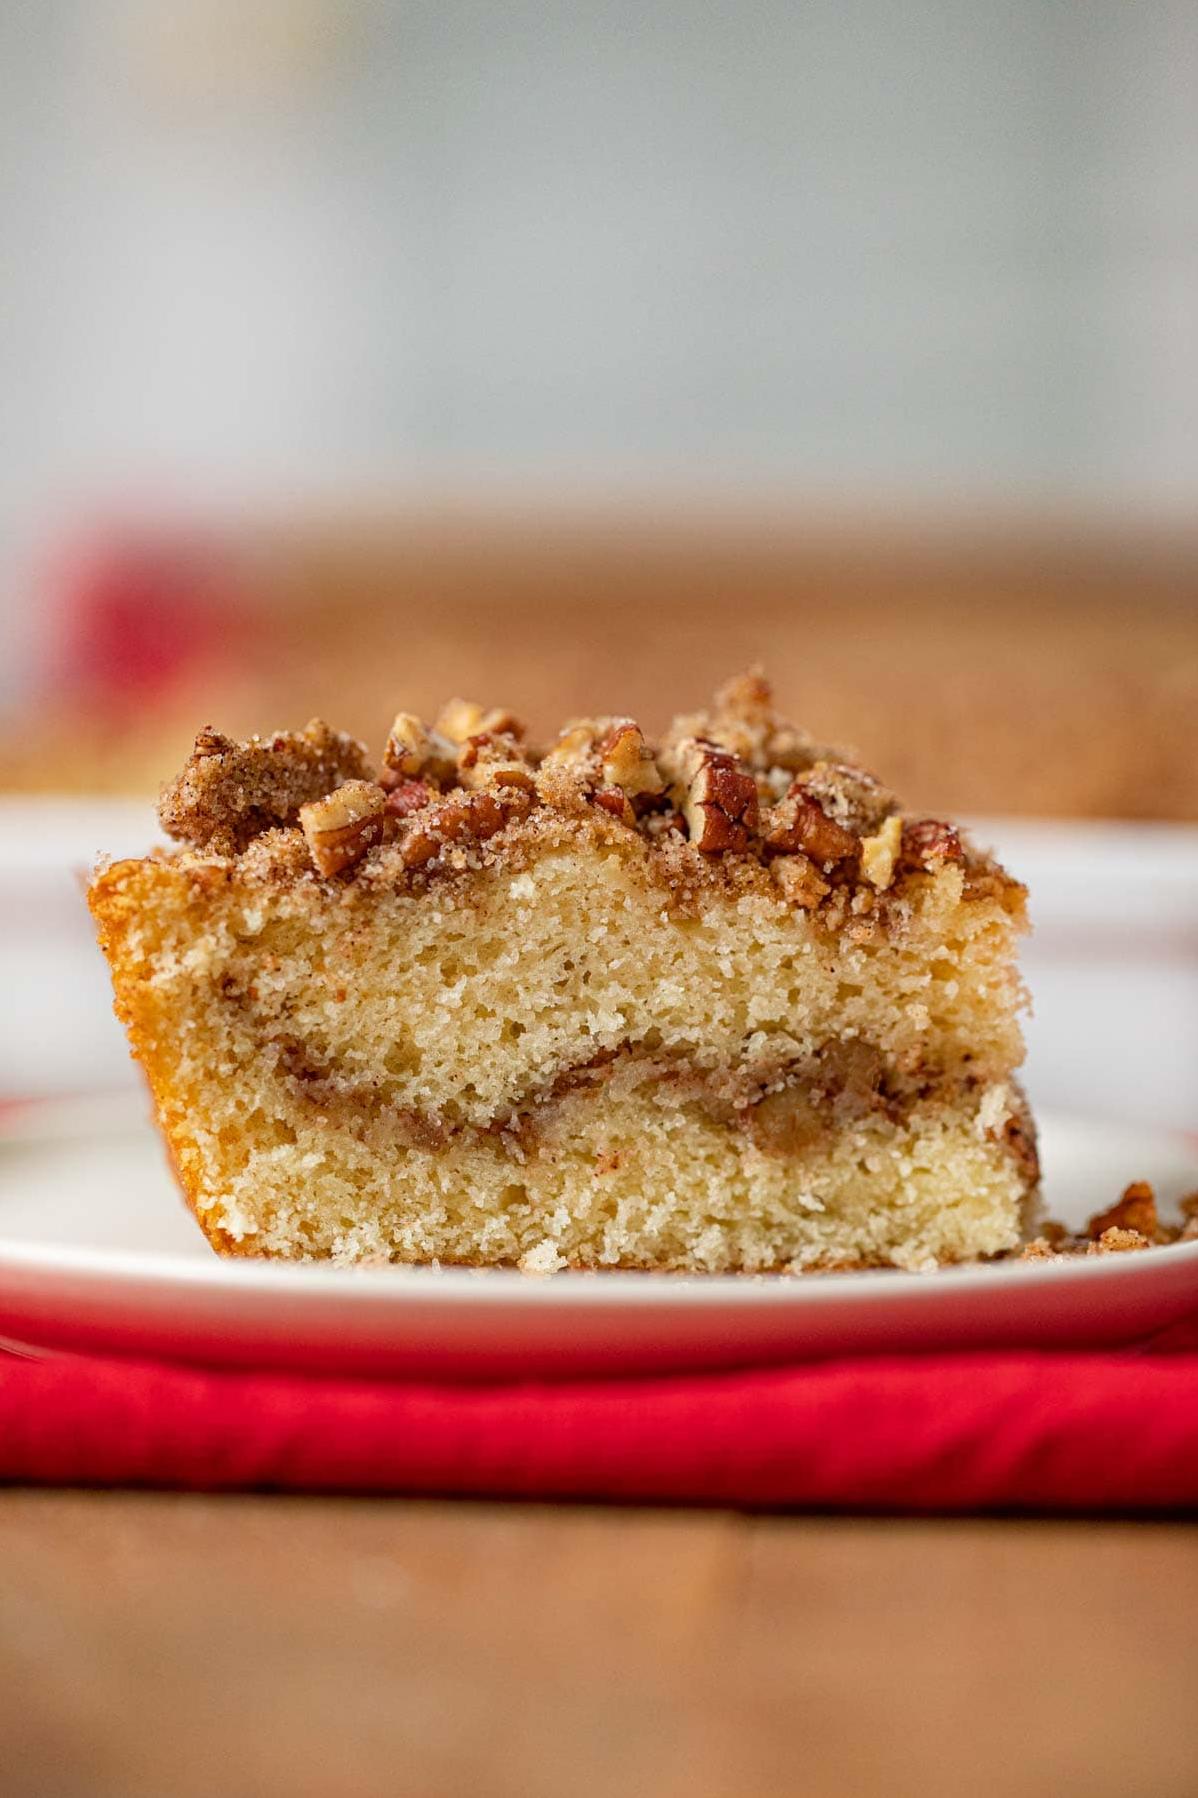  Enjoy the lightly sweet coffee cake with a strong cup of coffee to balance the flavors.